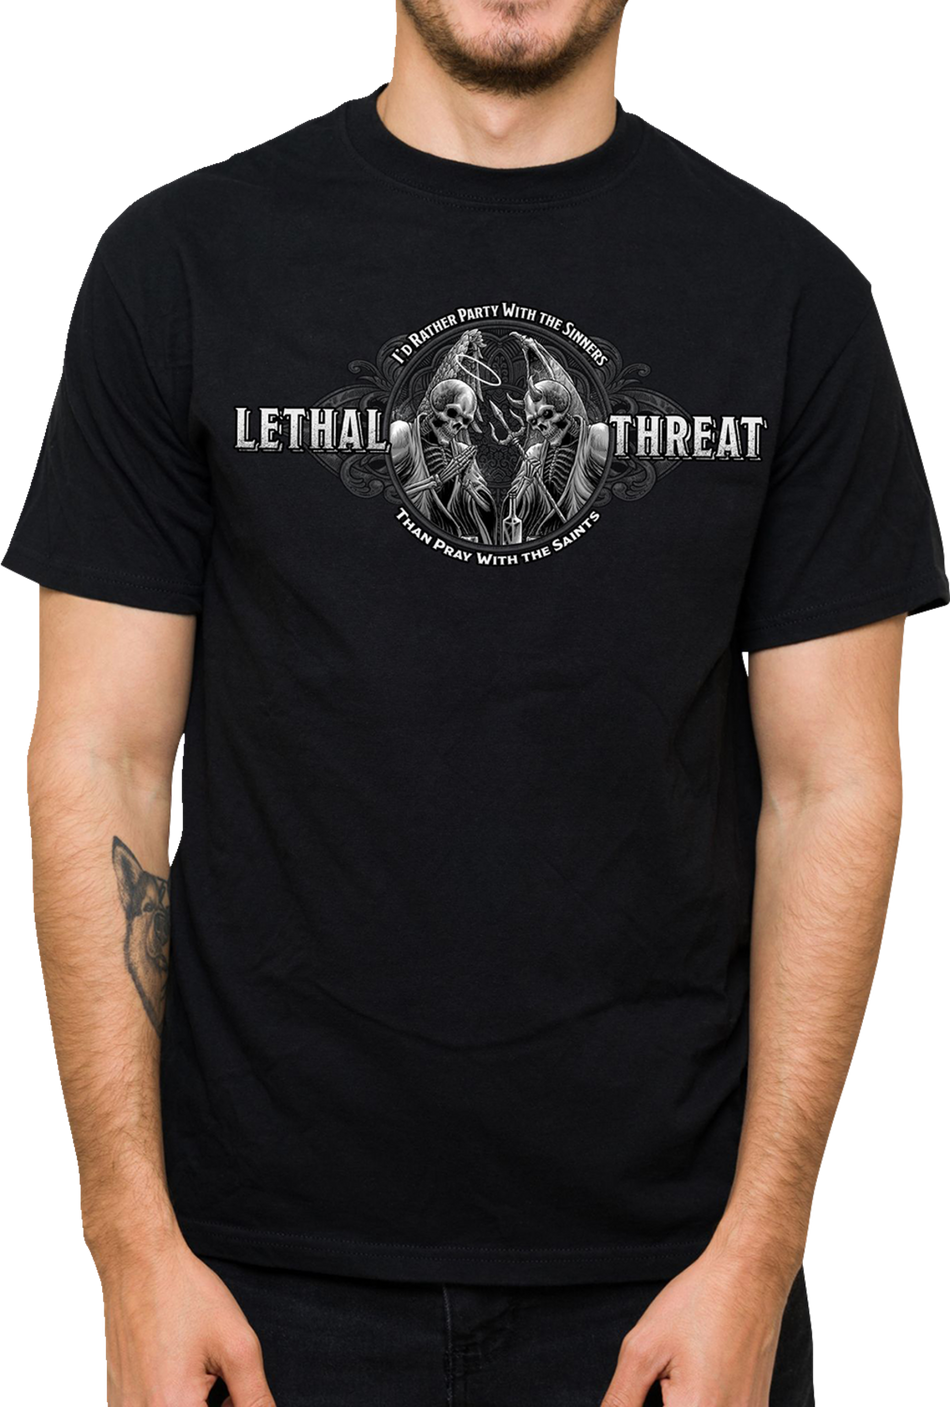 LETHAL THREAT Party with the Sinners T-Shirt - Black - 2XL LT20905XXL